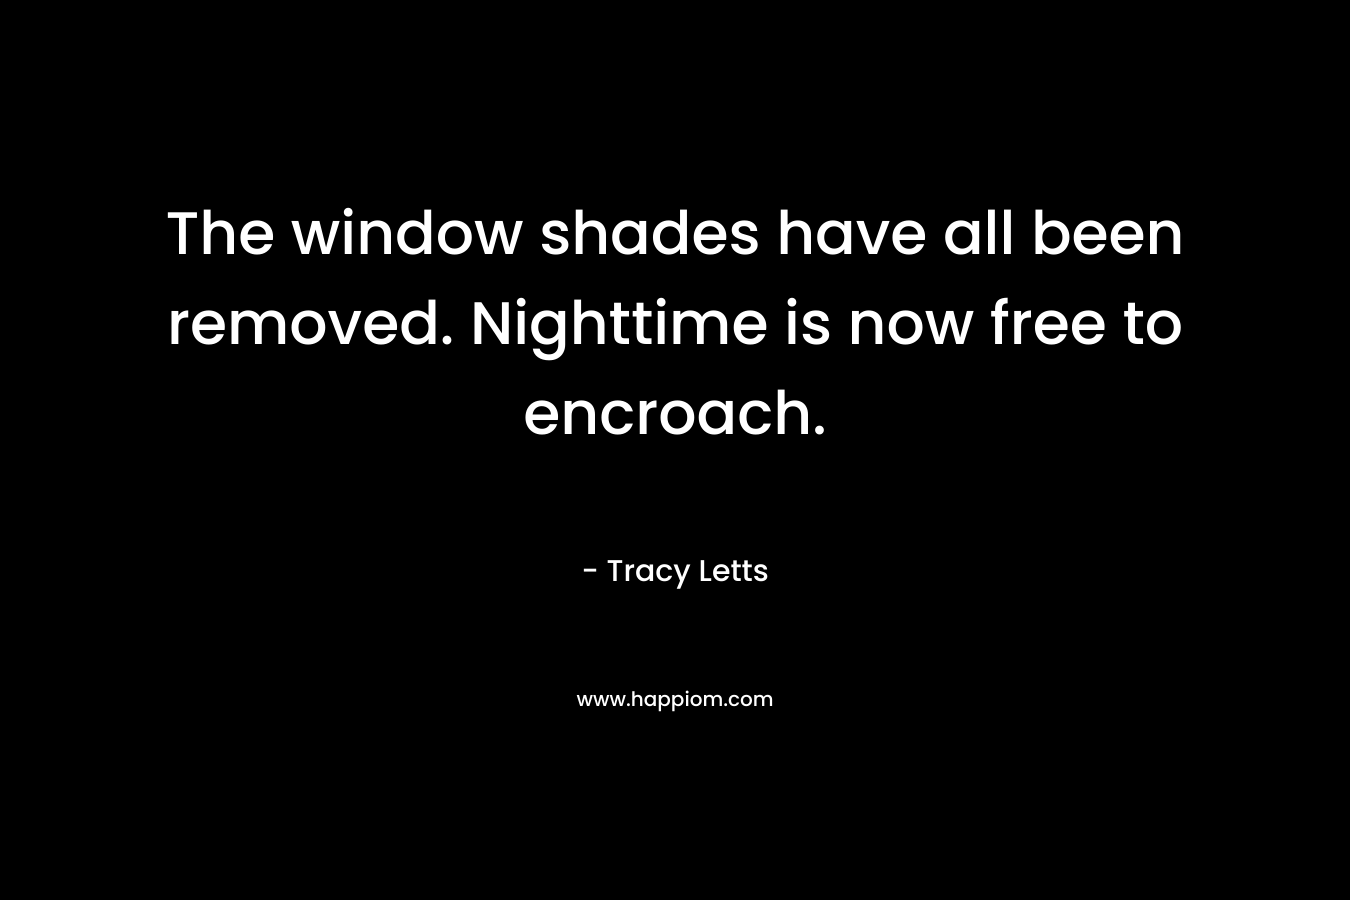 The window shades have all been removed. Nighttime is now free to encroach. – Tracy Letts